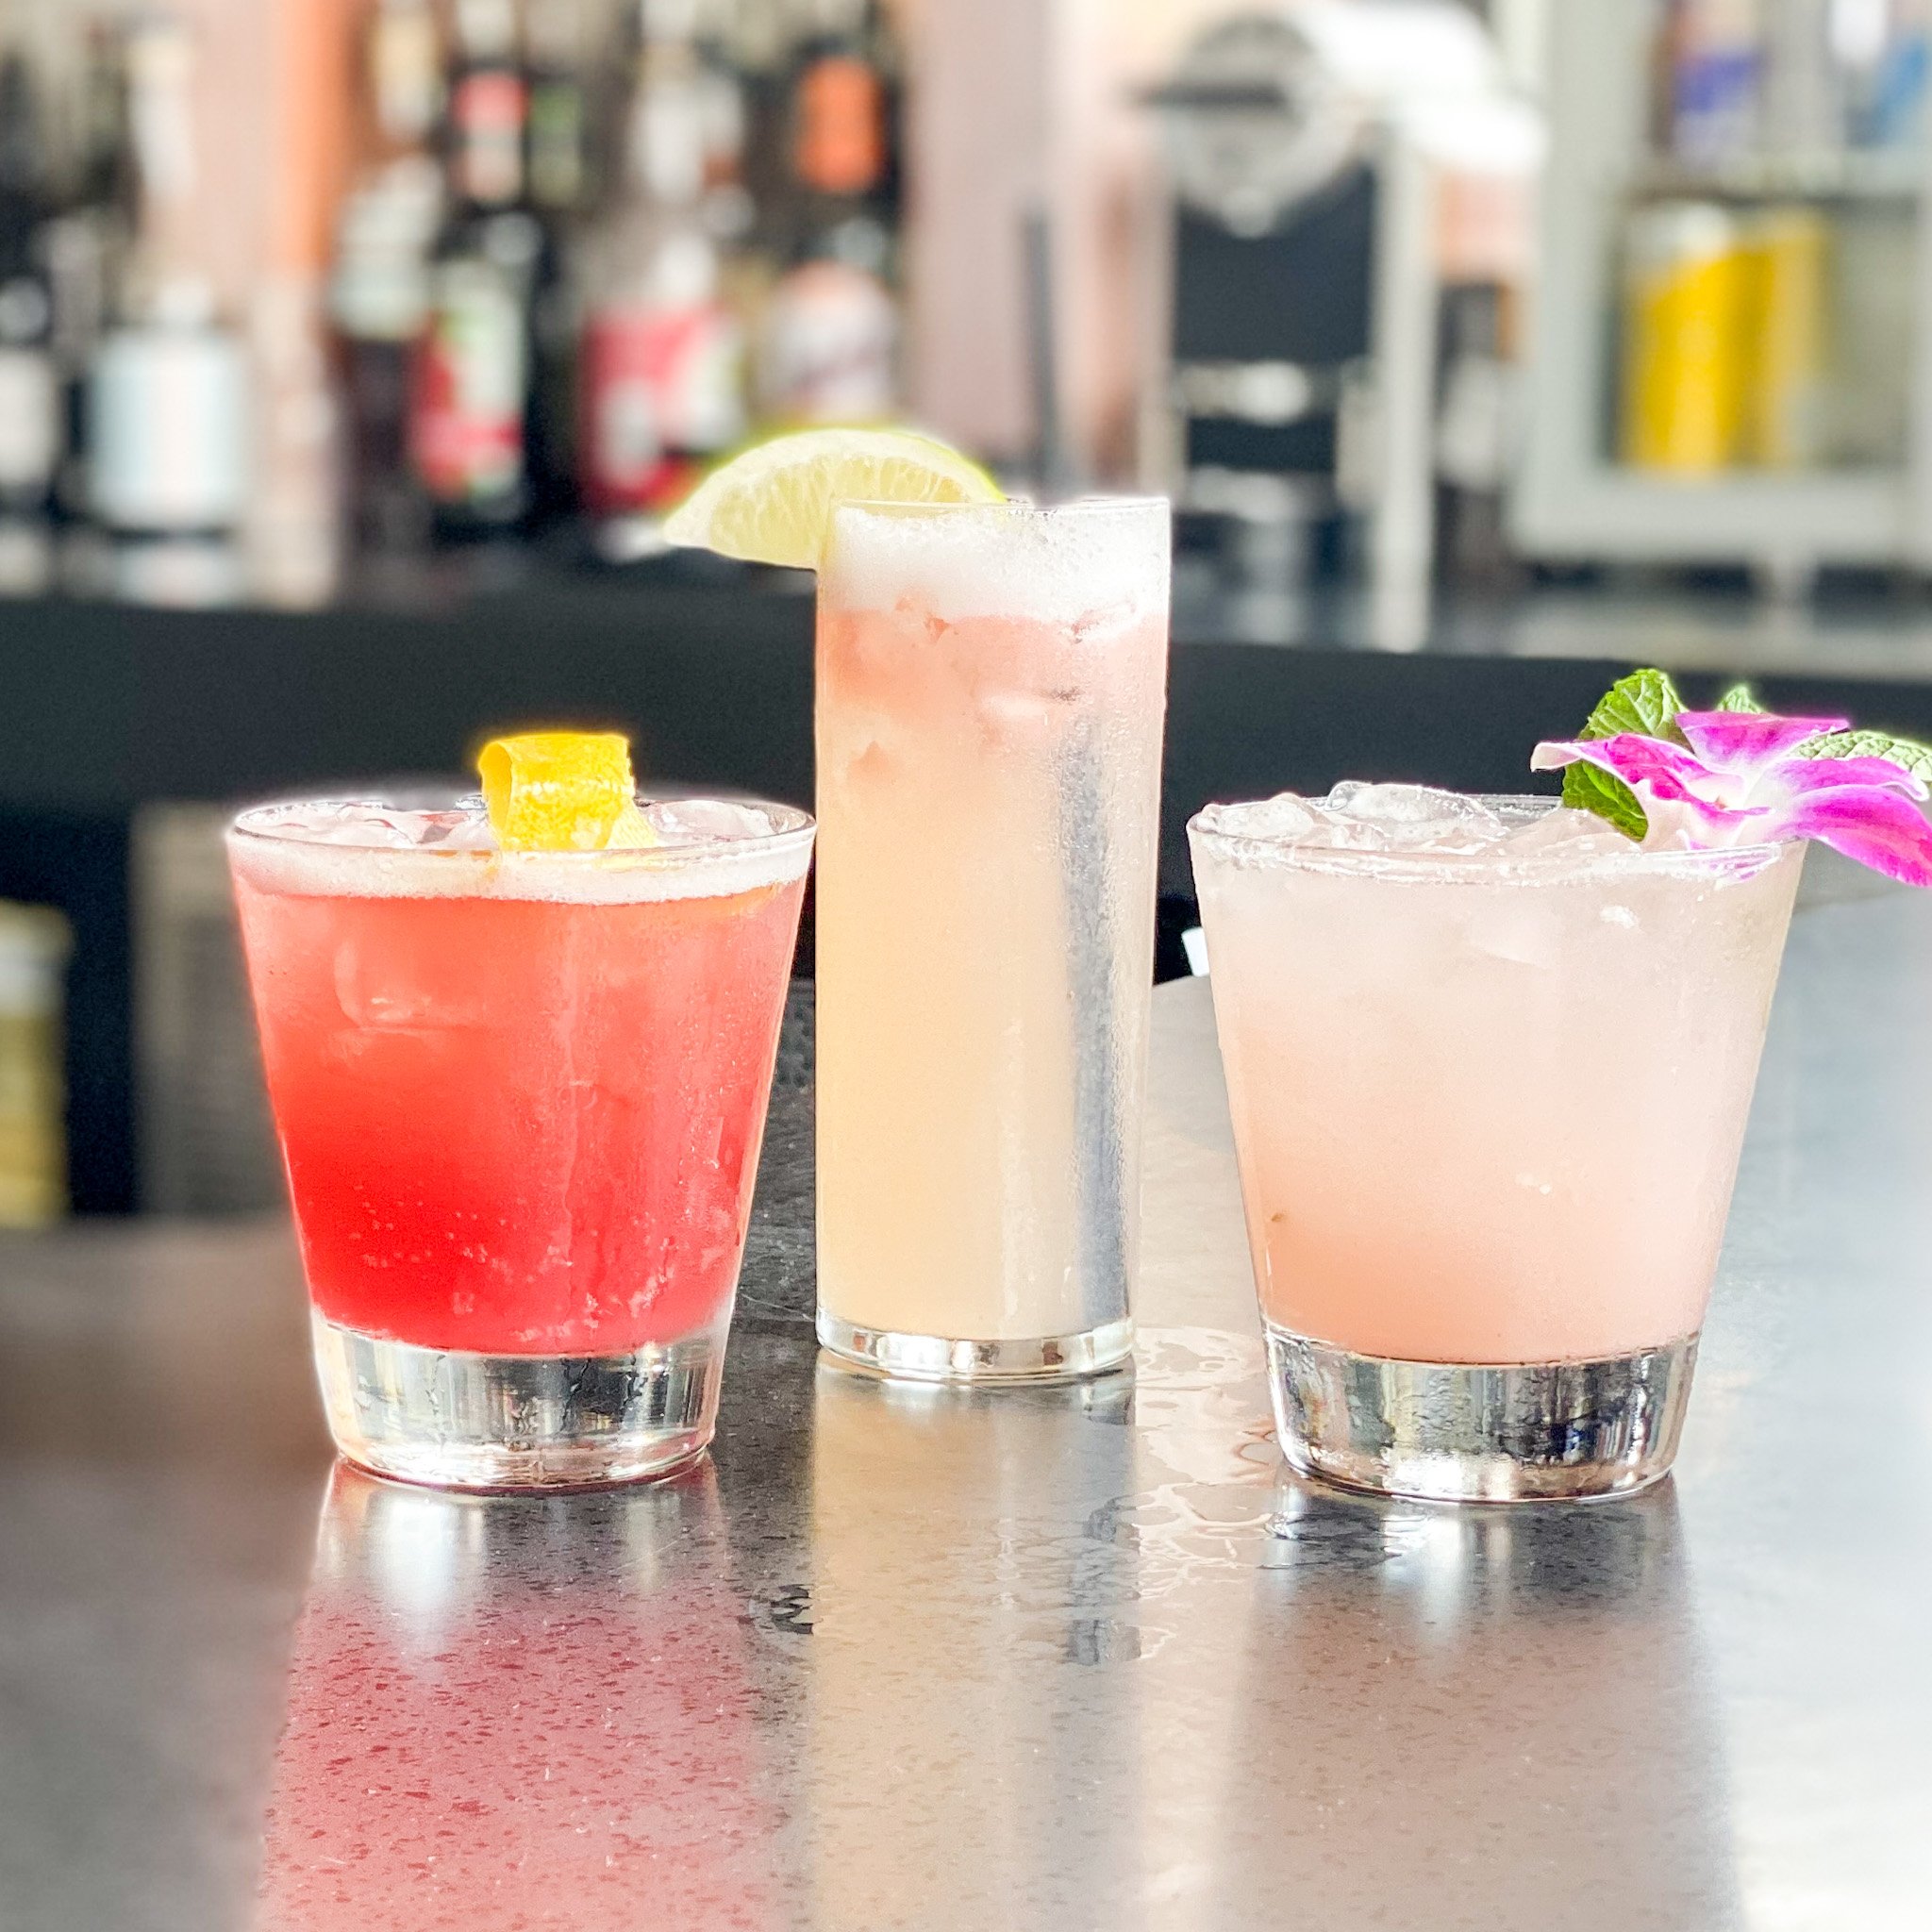 Are you still recovering from extreme weather PTSD? After last weekend's ⛈ storms and Tornado 🌪 watch/warnings, you deserve a nice craft cocktail (or mocktail) to unwind. See you on our patio or indoor dining soon! 😉 | #tulsafoodie #tulsaeats #broo